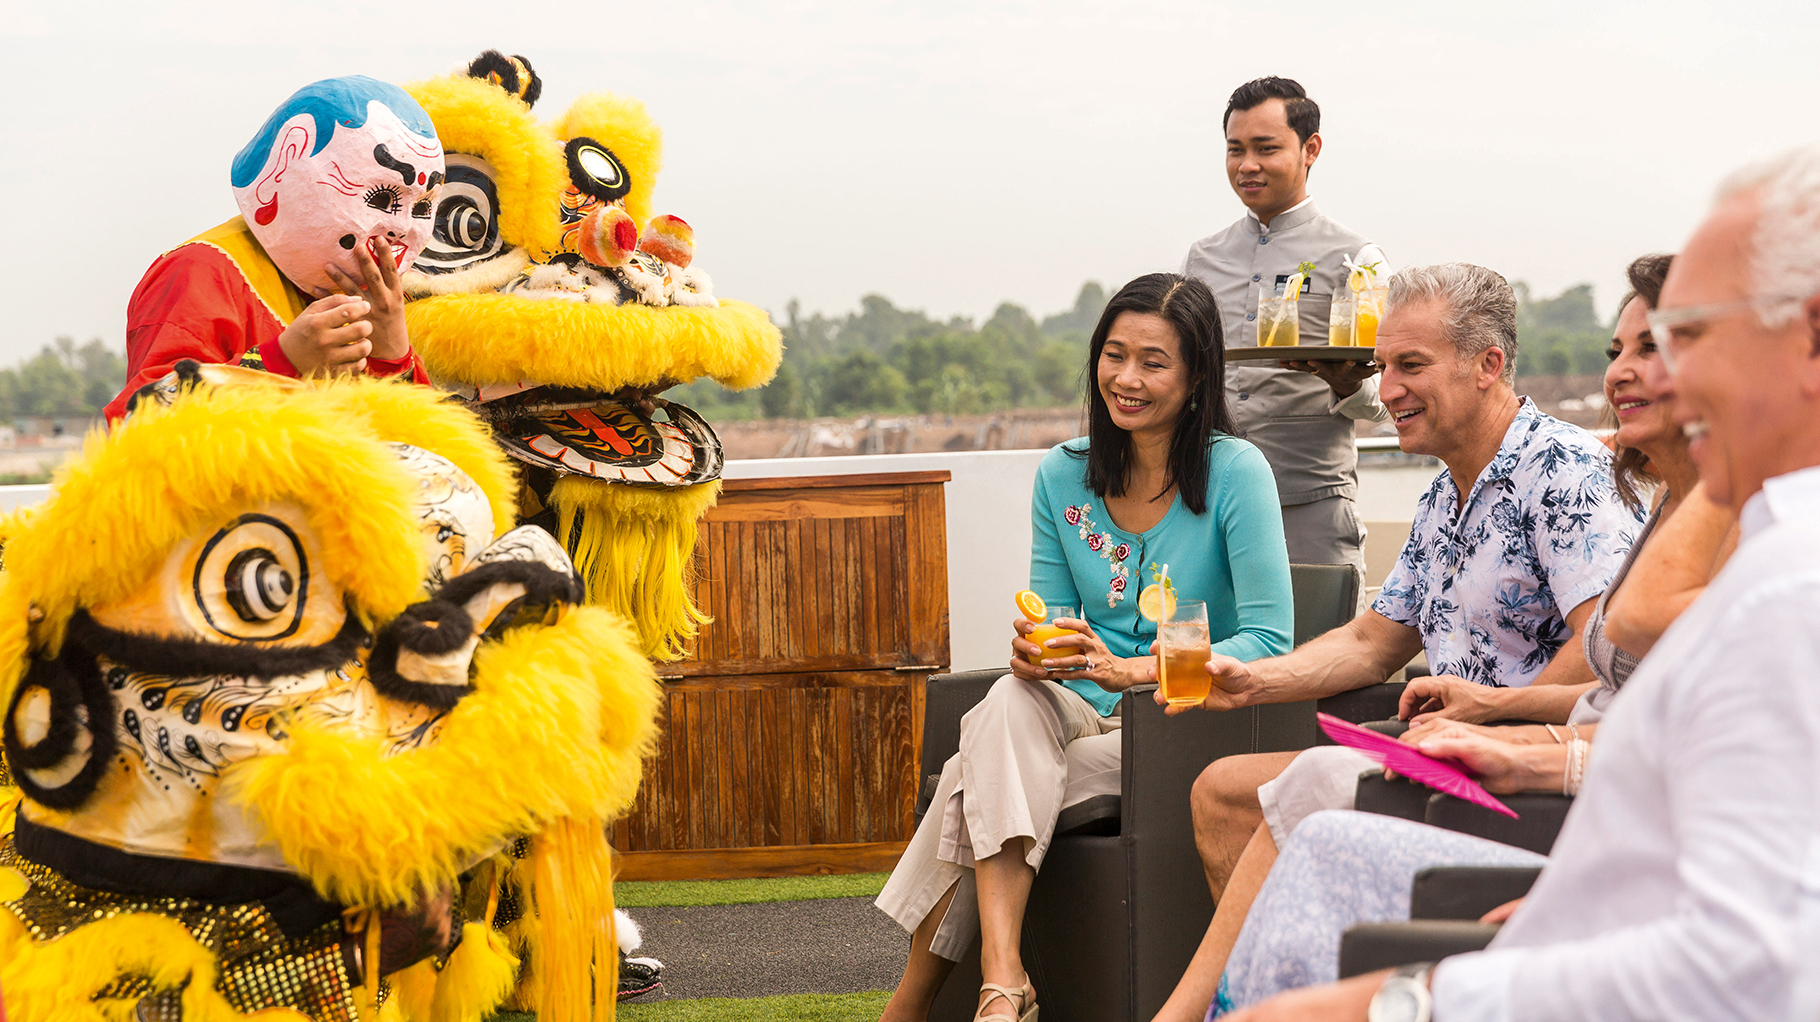 On the Mekong, Scenic bring local entertainment onboard the ship